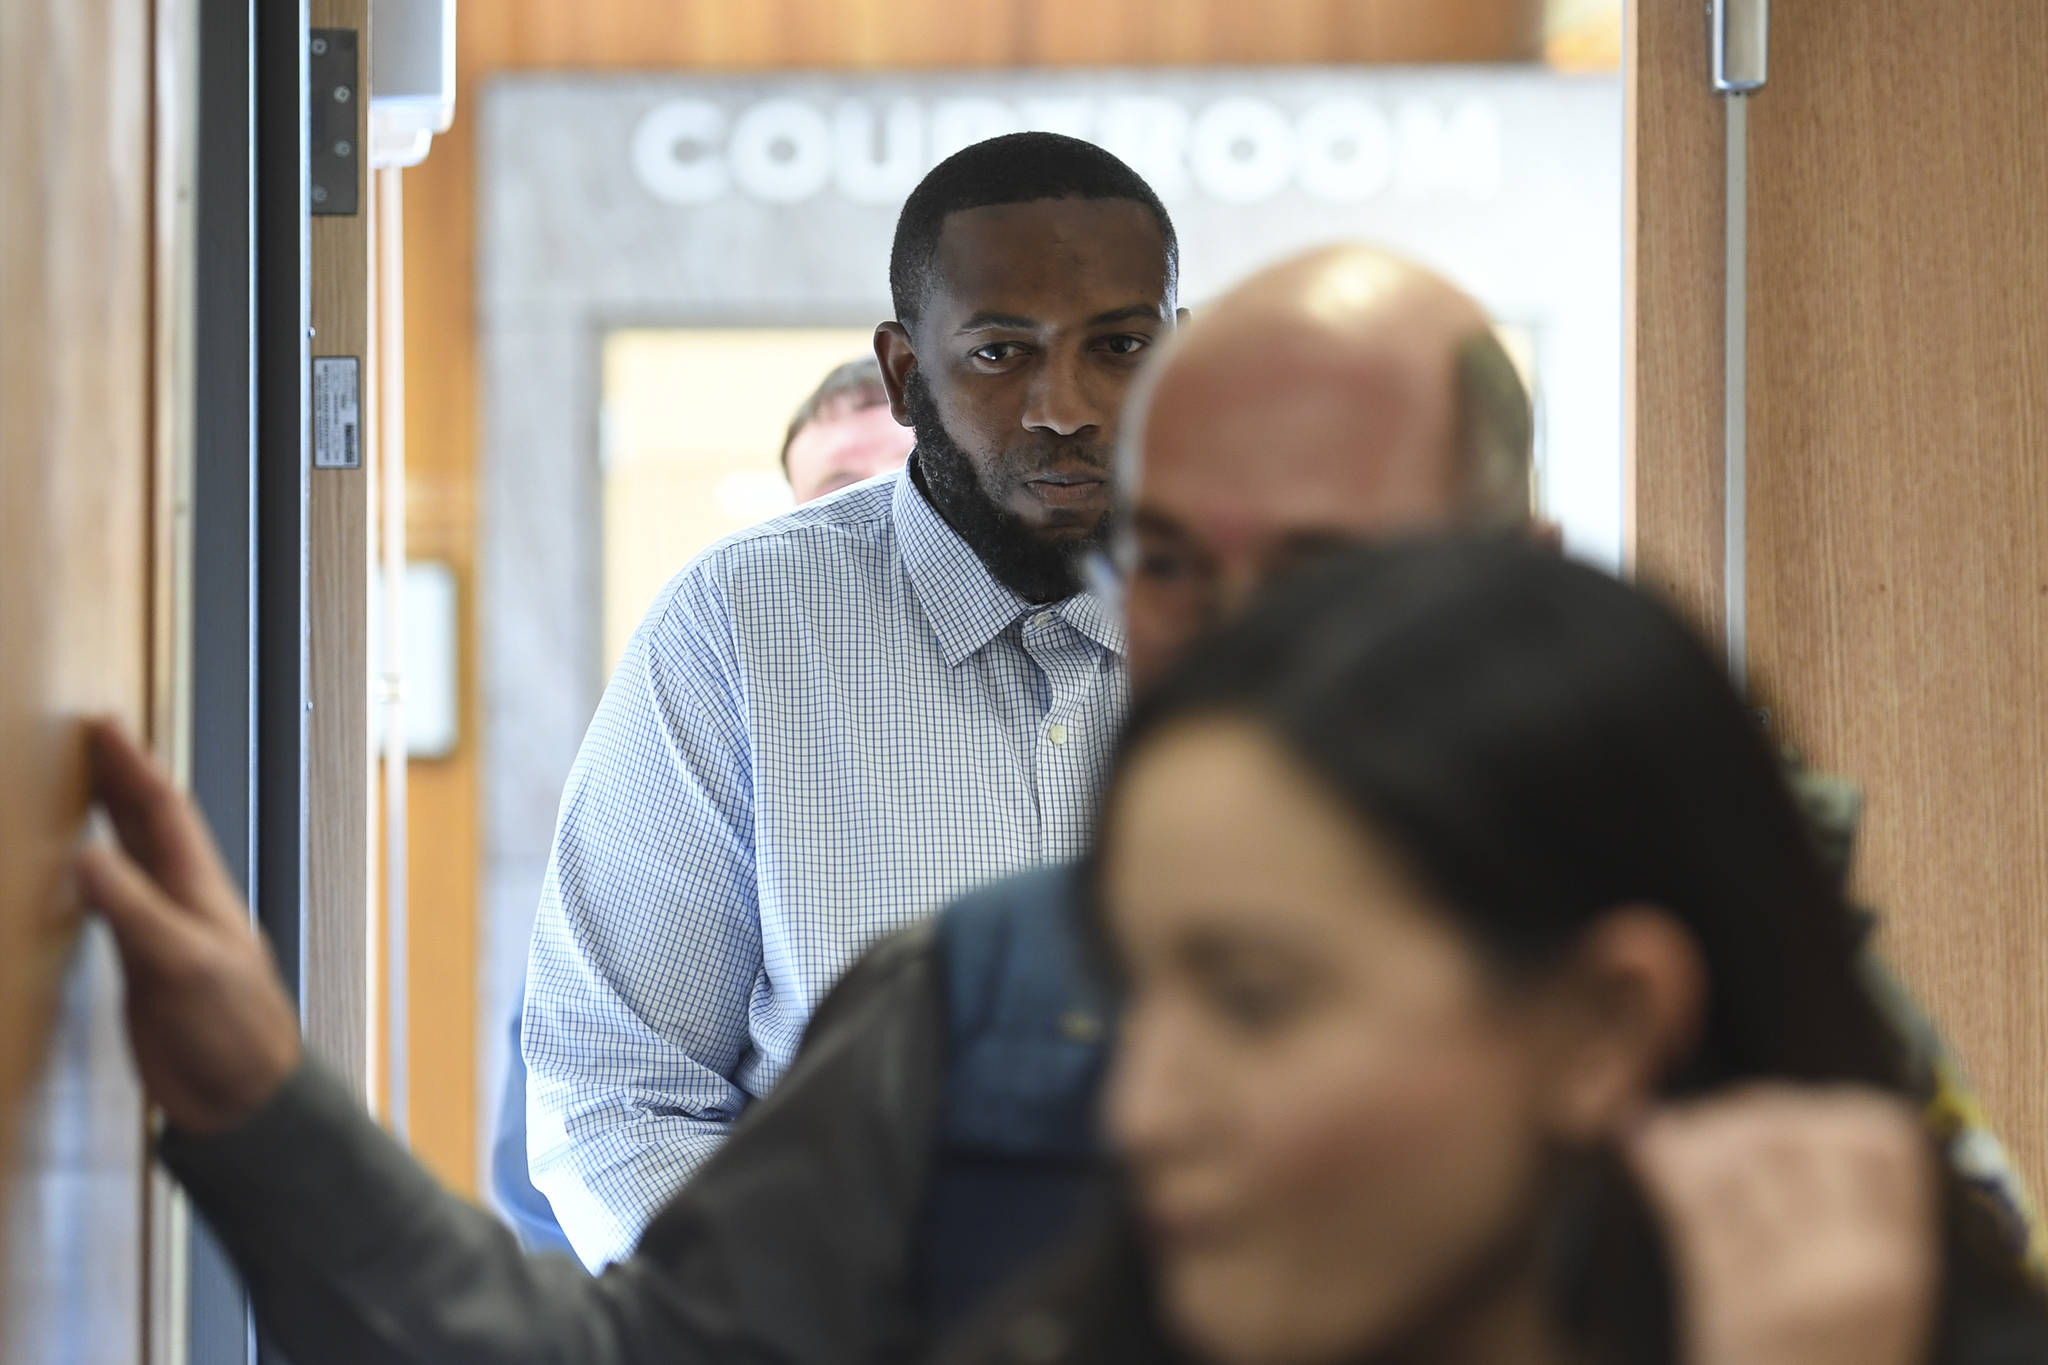 Laron Carlton Graham enters Juneau Superior Court on Tuesday, Oct. 8, 2019. Graham was found not guilty on two counts of first-degree murder for the November 2015 shooting deaths of 36-year-old Robert H. Meireis and 34-year-old Elizabeth K. Tonsmeire. (Michael Penn | Juneau Empire)